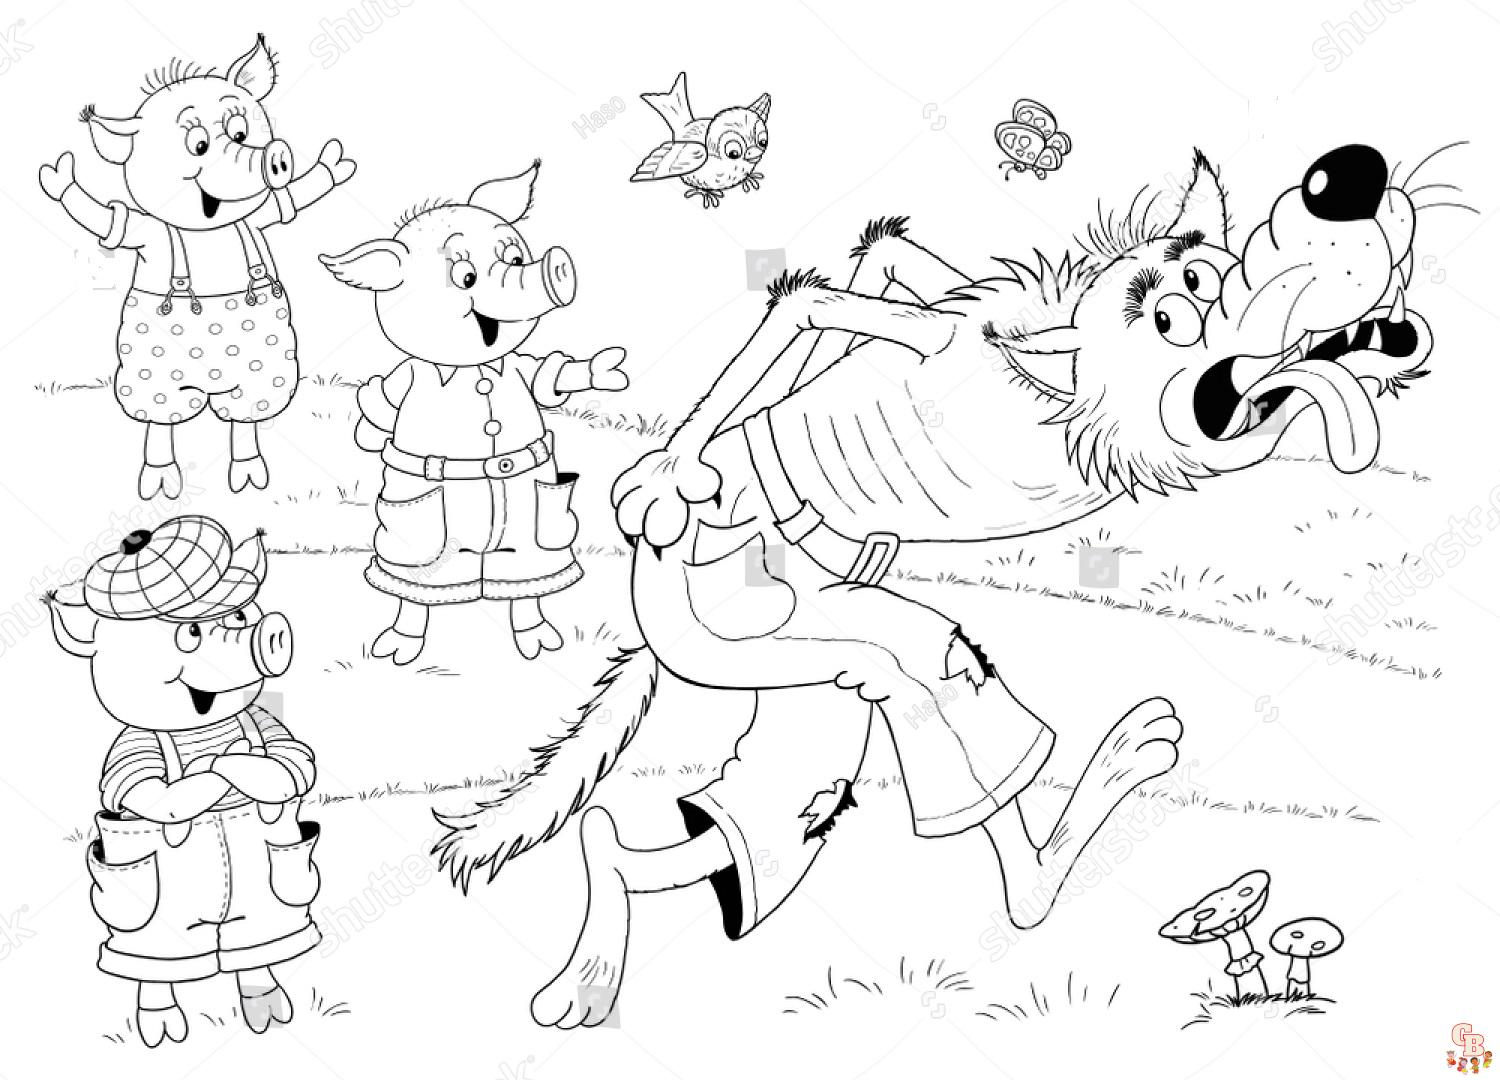 Get creative with three little pigs coloring pages